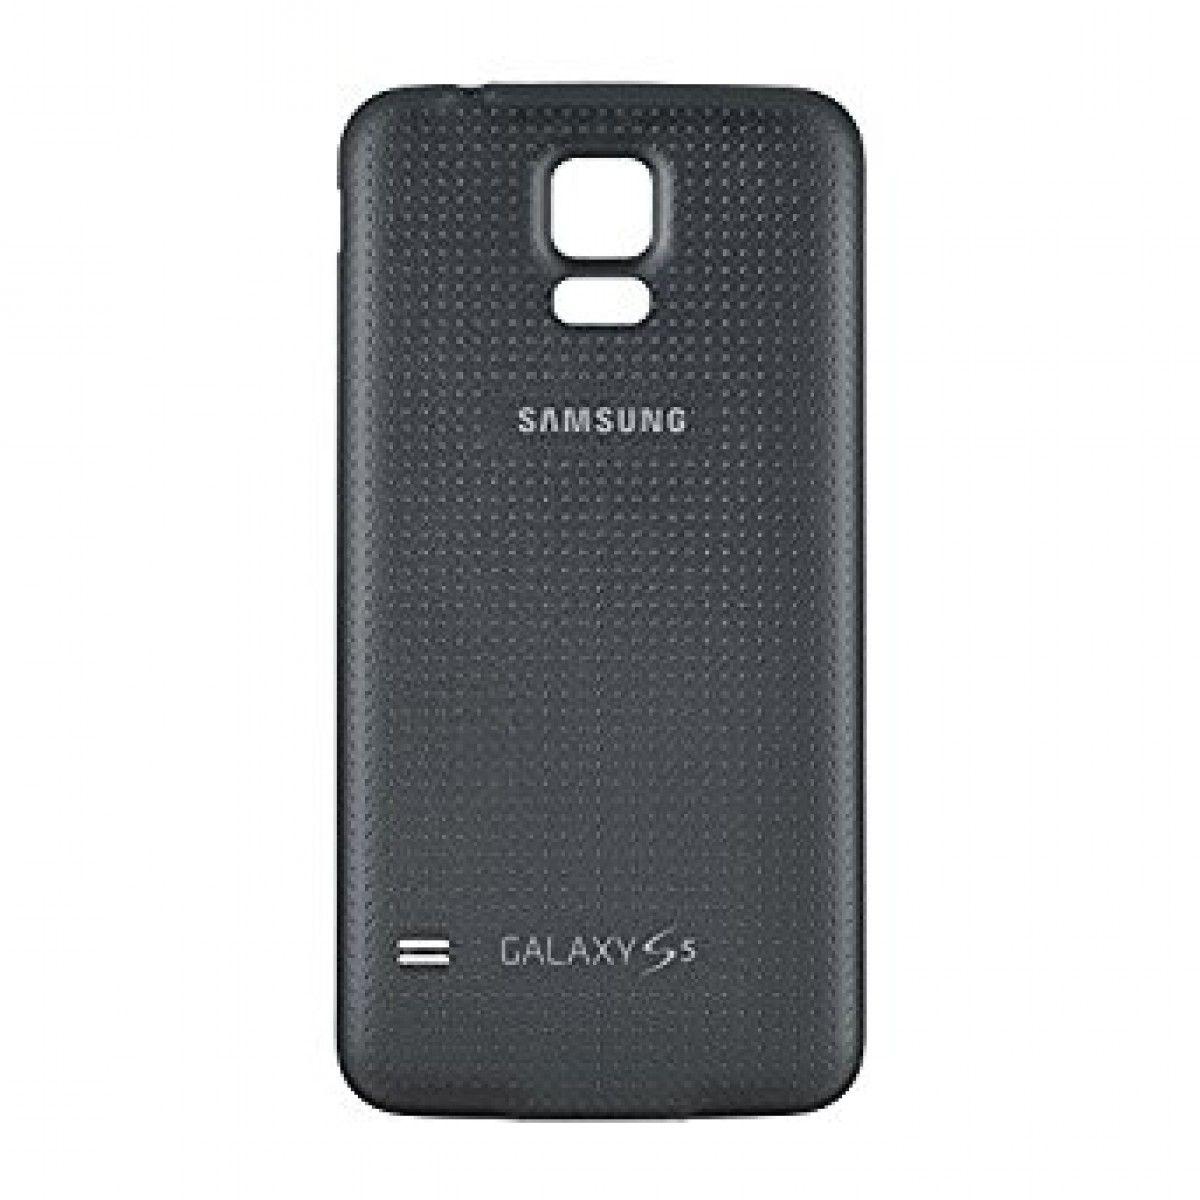 Welcome to Samsung Logo - OEM Samsung Galaxy S5 SM-G900 Battery Door Back Cover Replacement ...